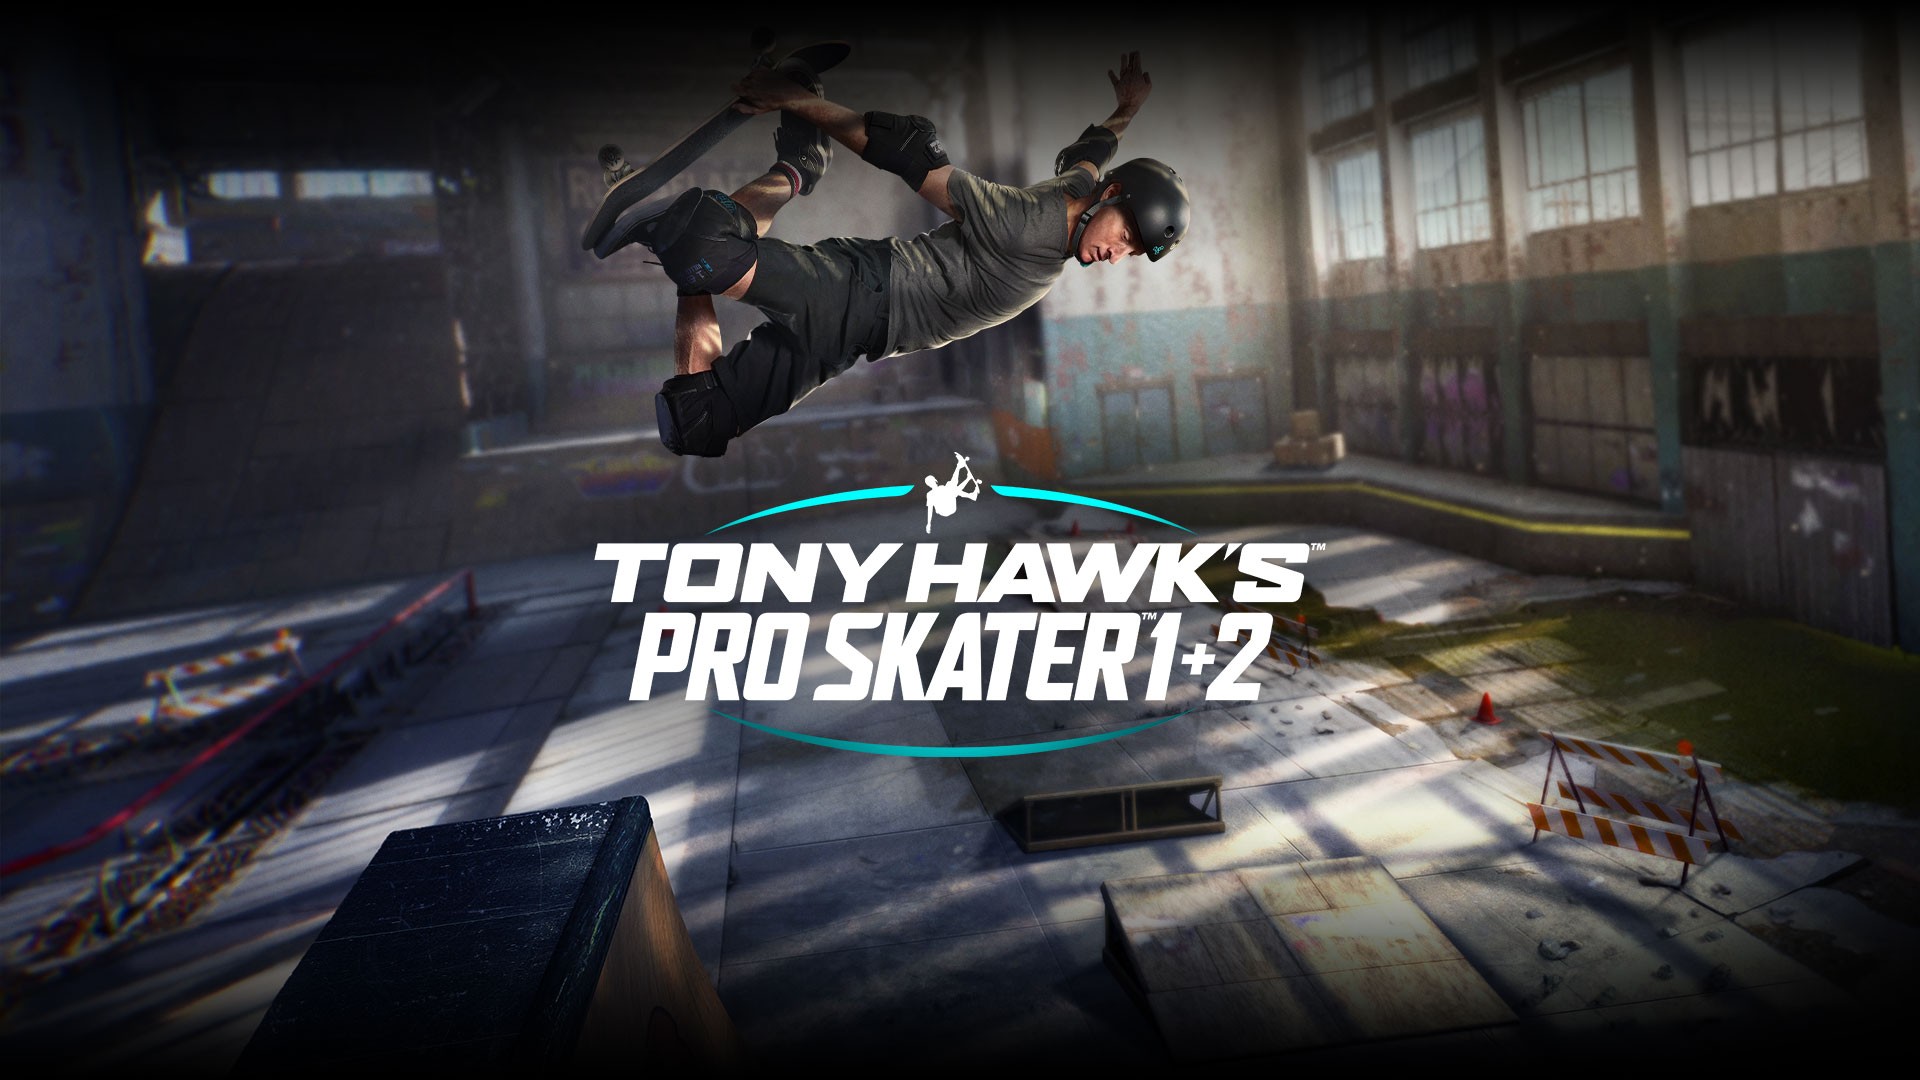 Shred On The Go With Tony Hawk’s Pro Skater 1 & 2 – Available Now On Nintendo Switch